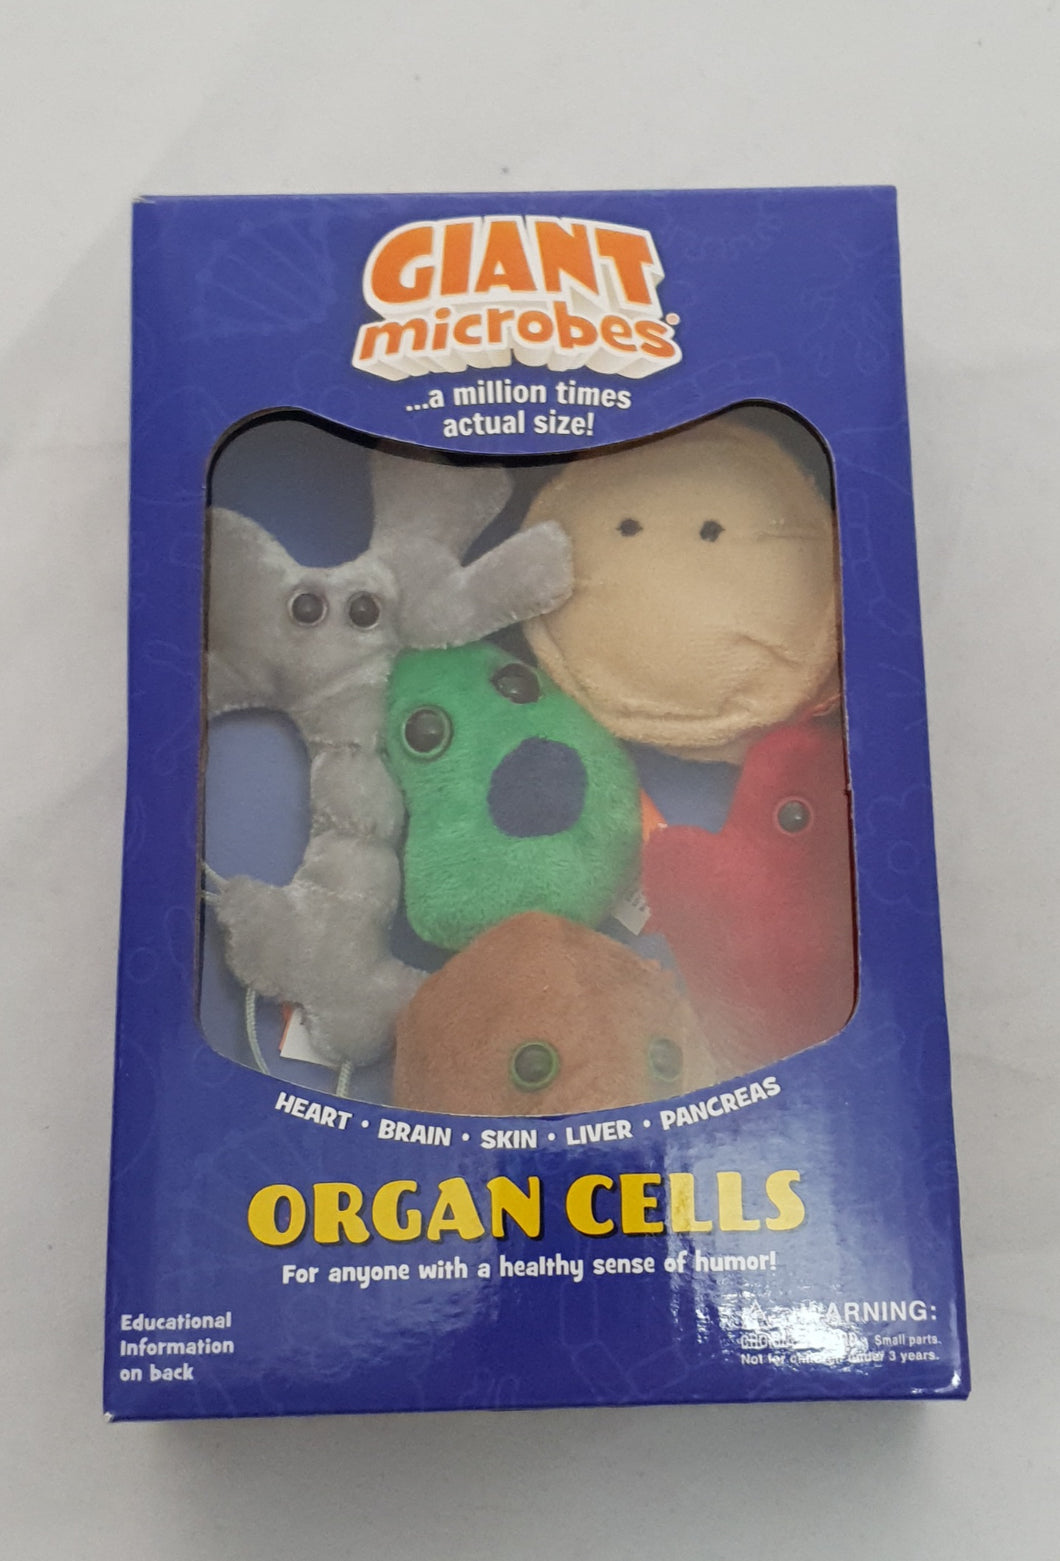 Giant Microbes Organ Cells